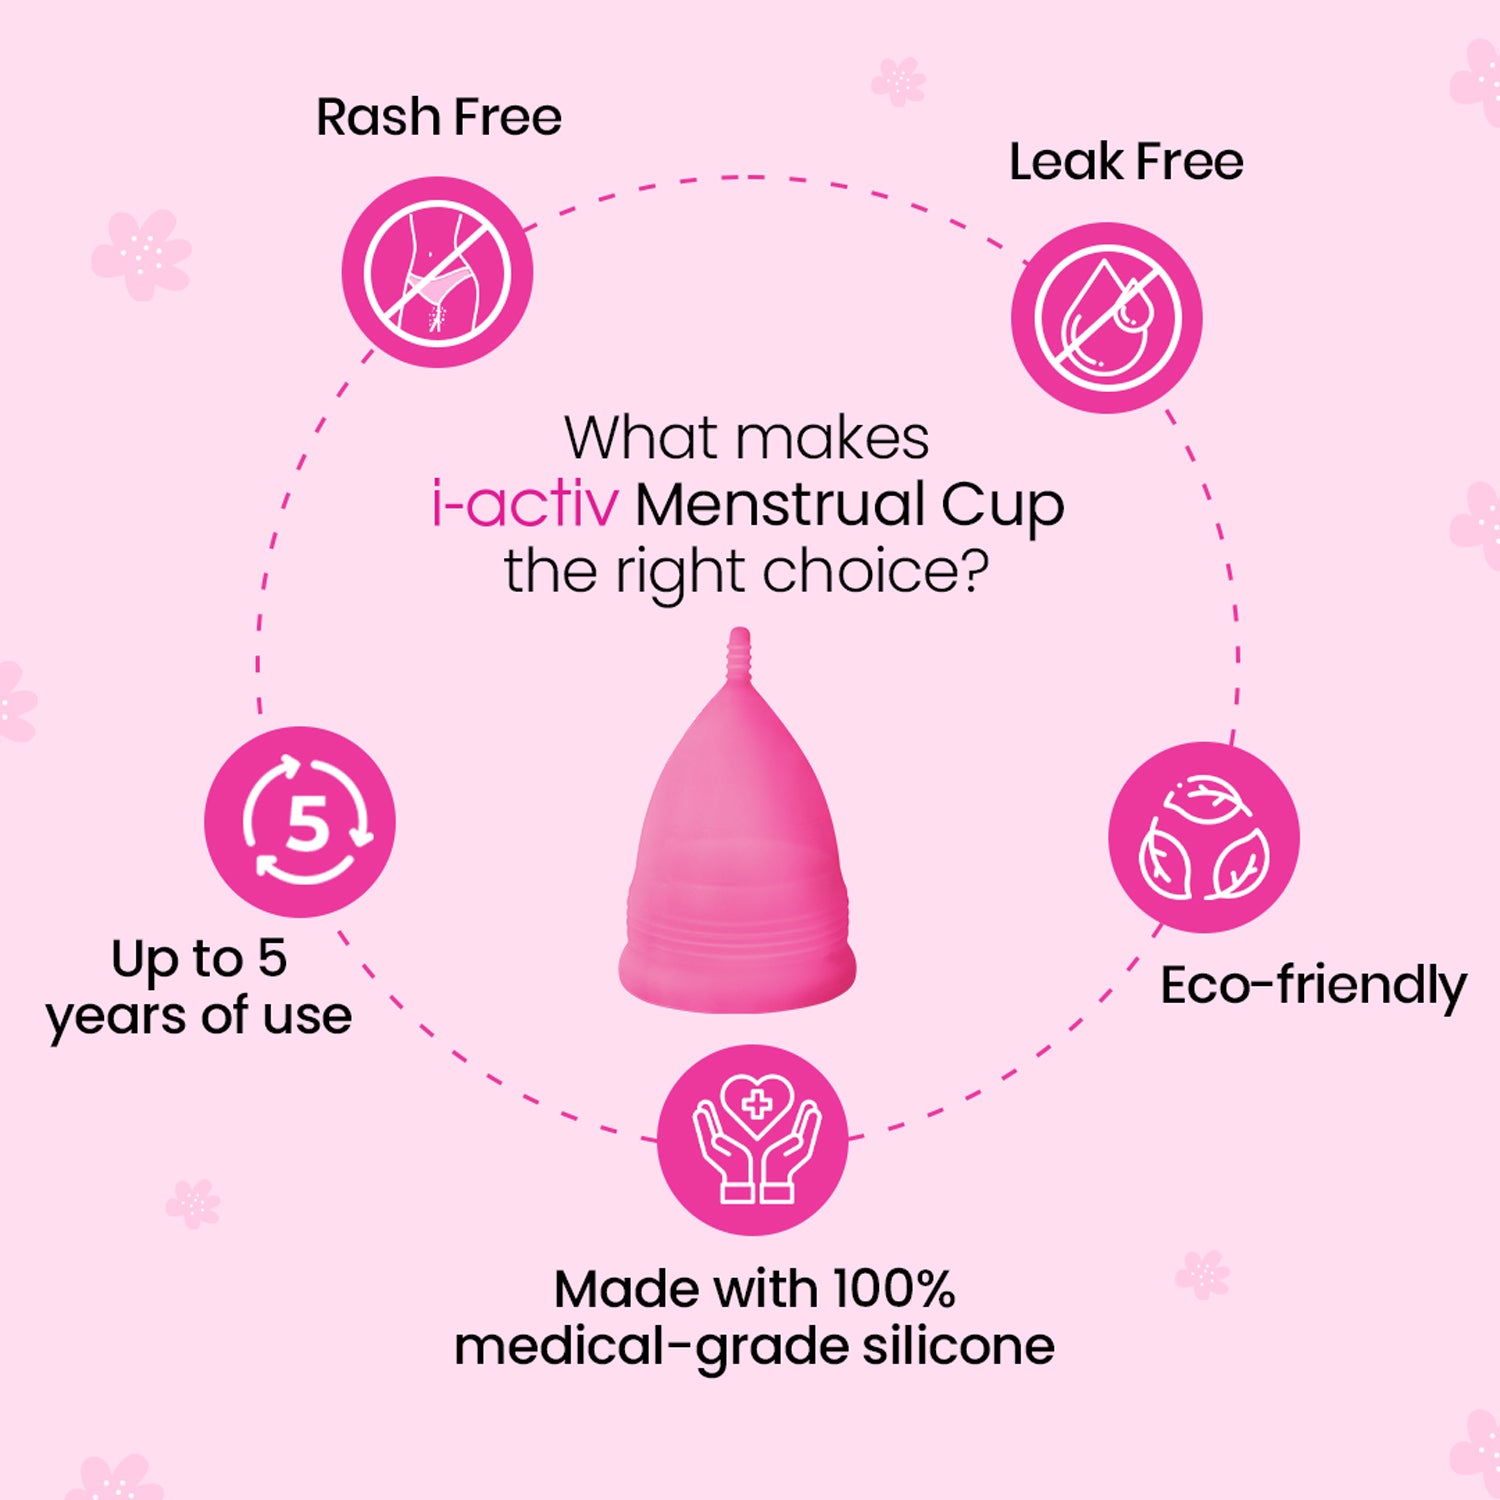 Buy i -Activ Menstrual Cup, Reuseable & Soft Period Cup